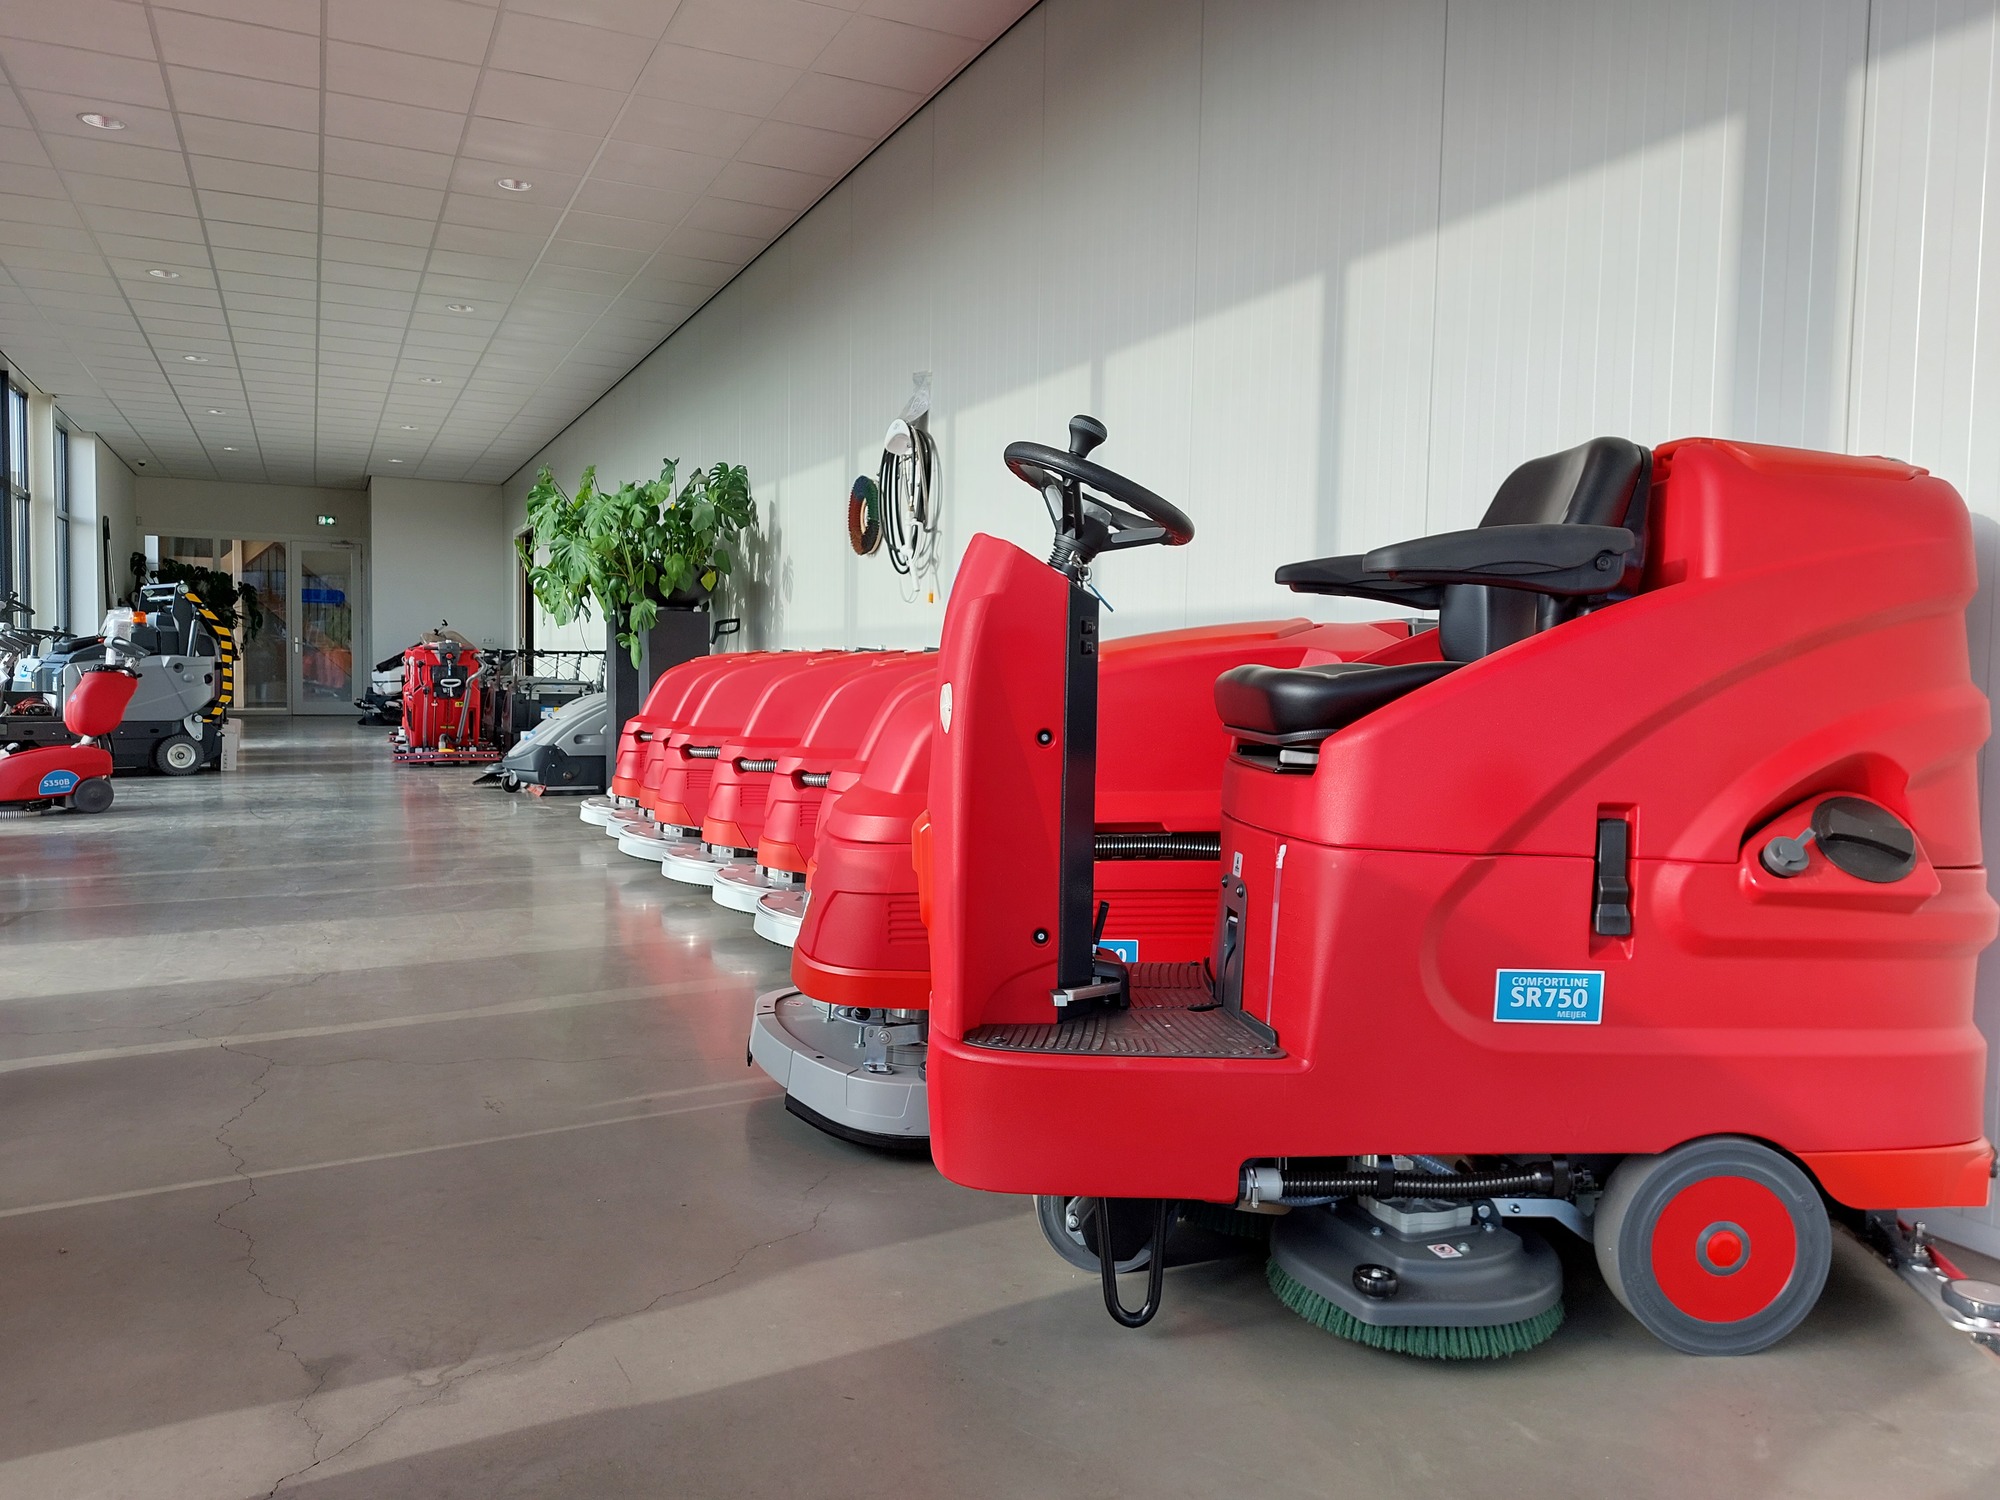 METECH SWEEPERS & SCRUBBERS undefined: 3 kép.